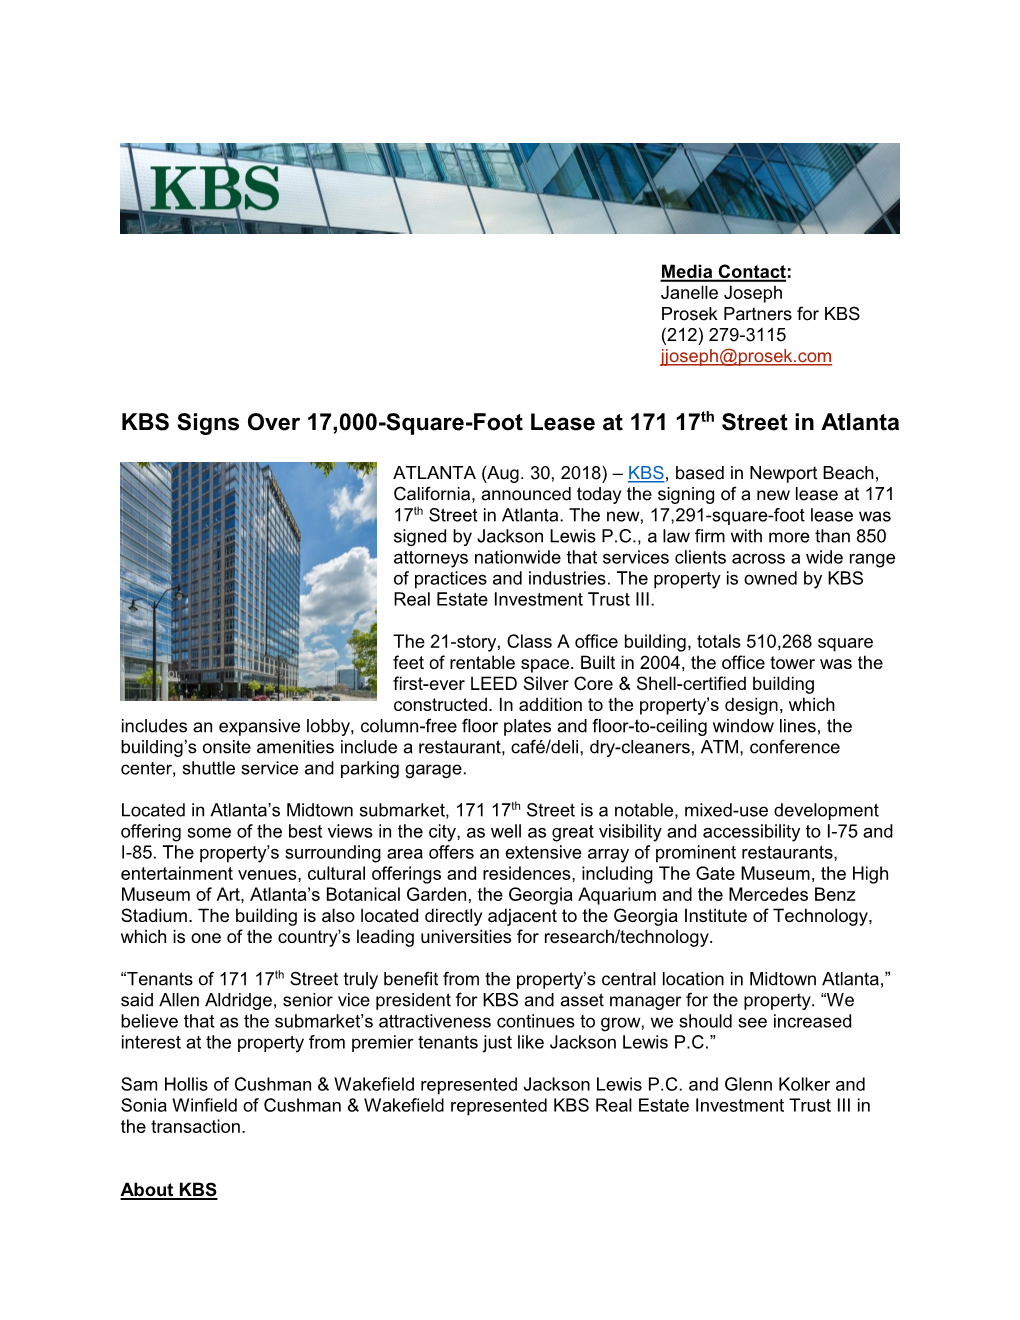 KBS Signs Over 17,000-Square-Foot Lease at 171 17Th Street in Atlanta